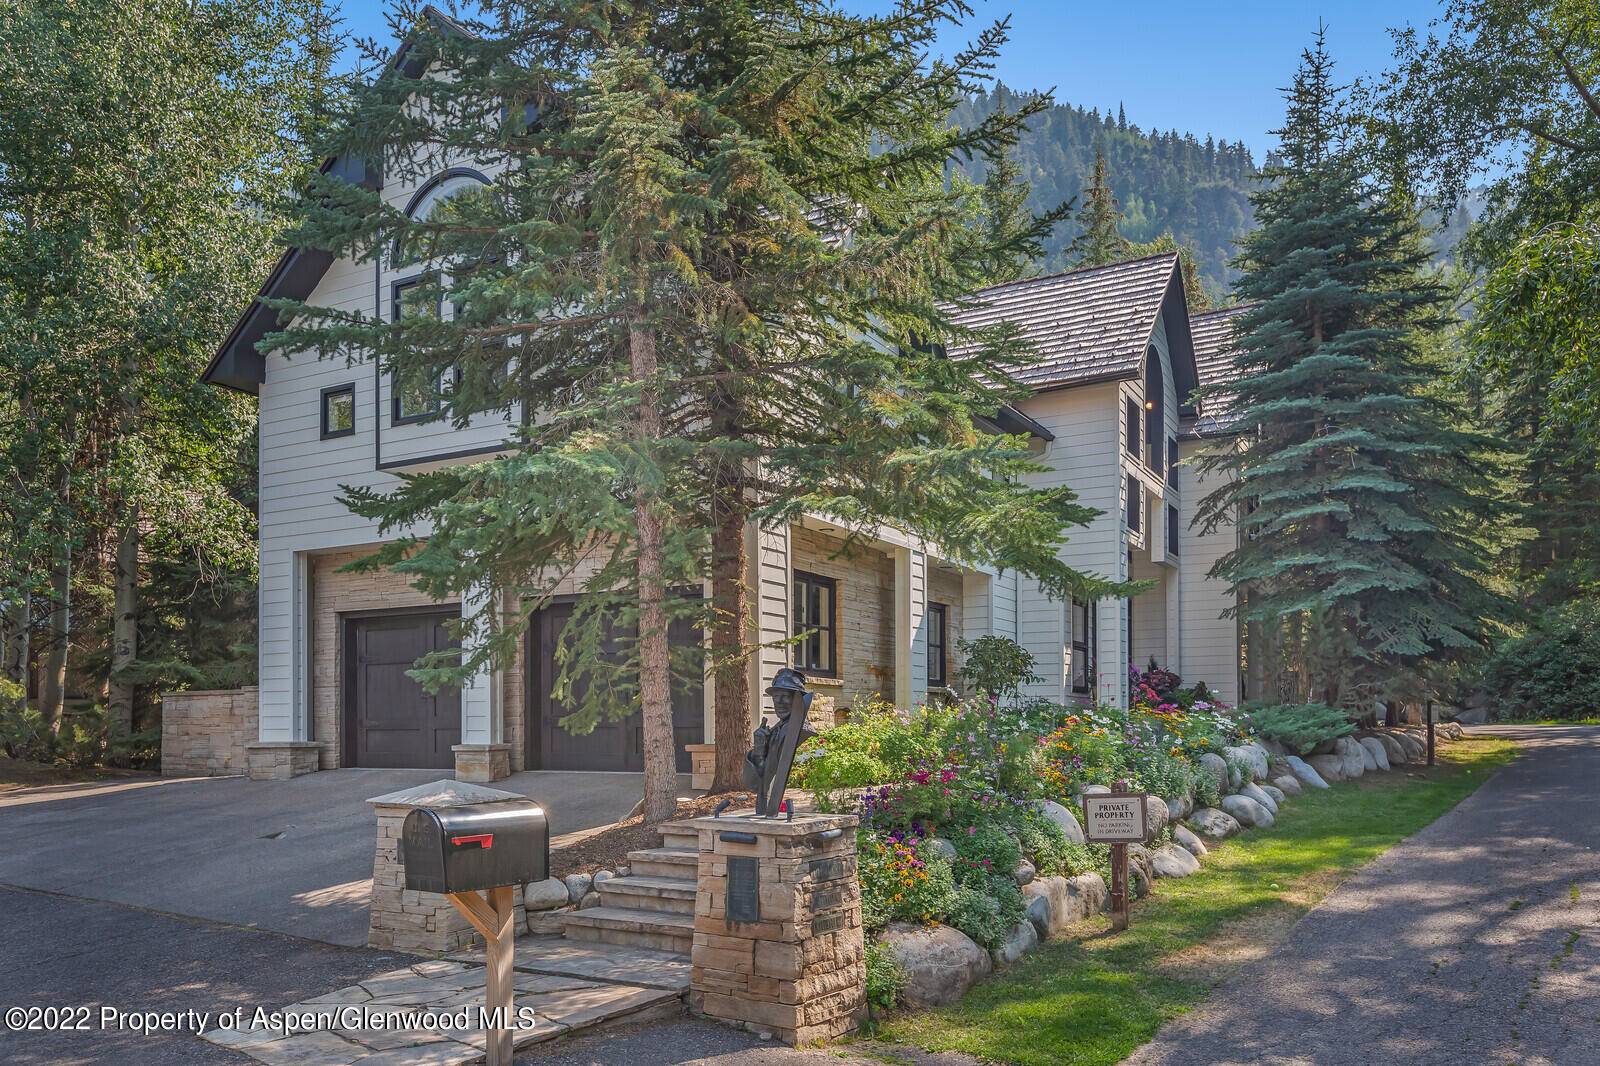 Introducing the only 5 bedroom single family home currently available in Aspen's downtown core.